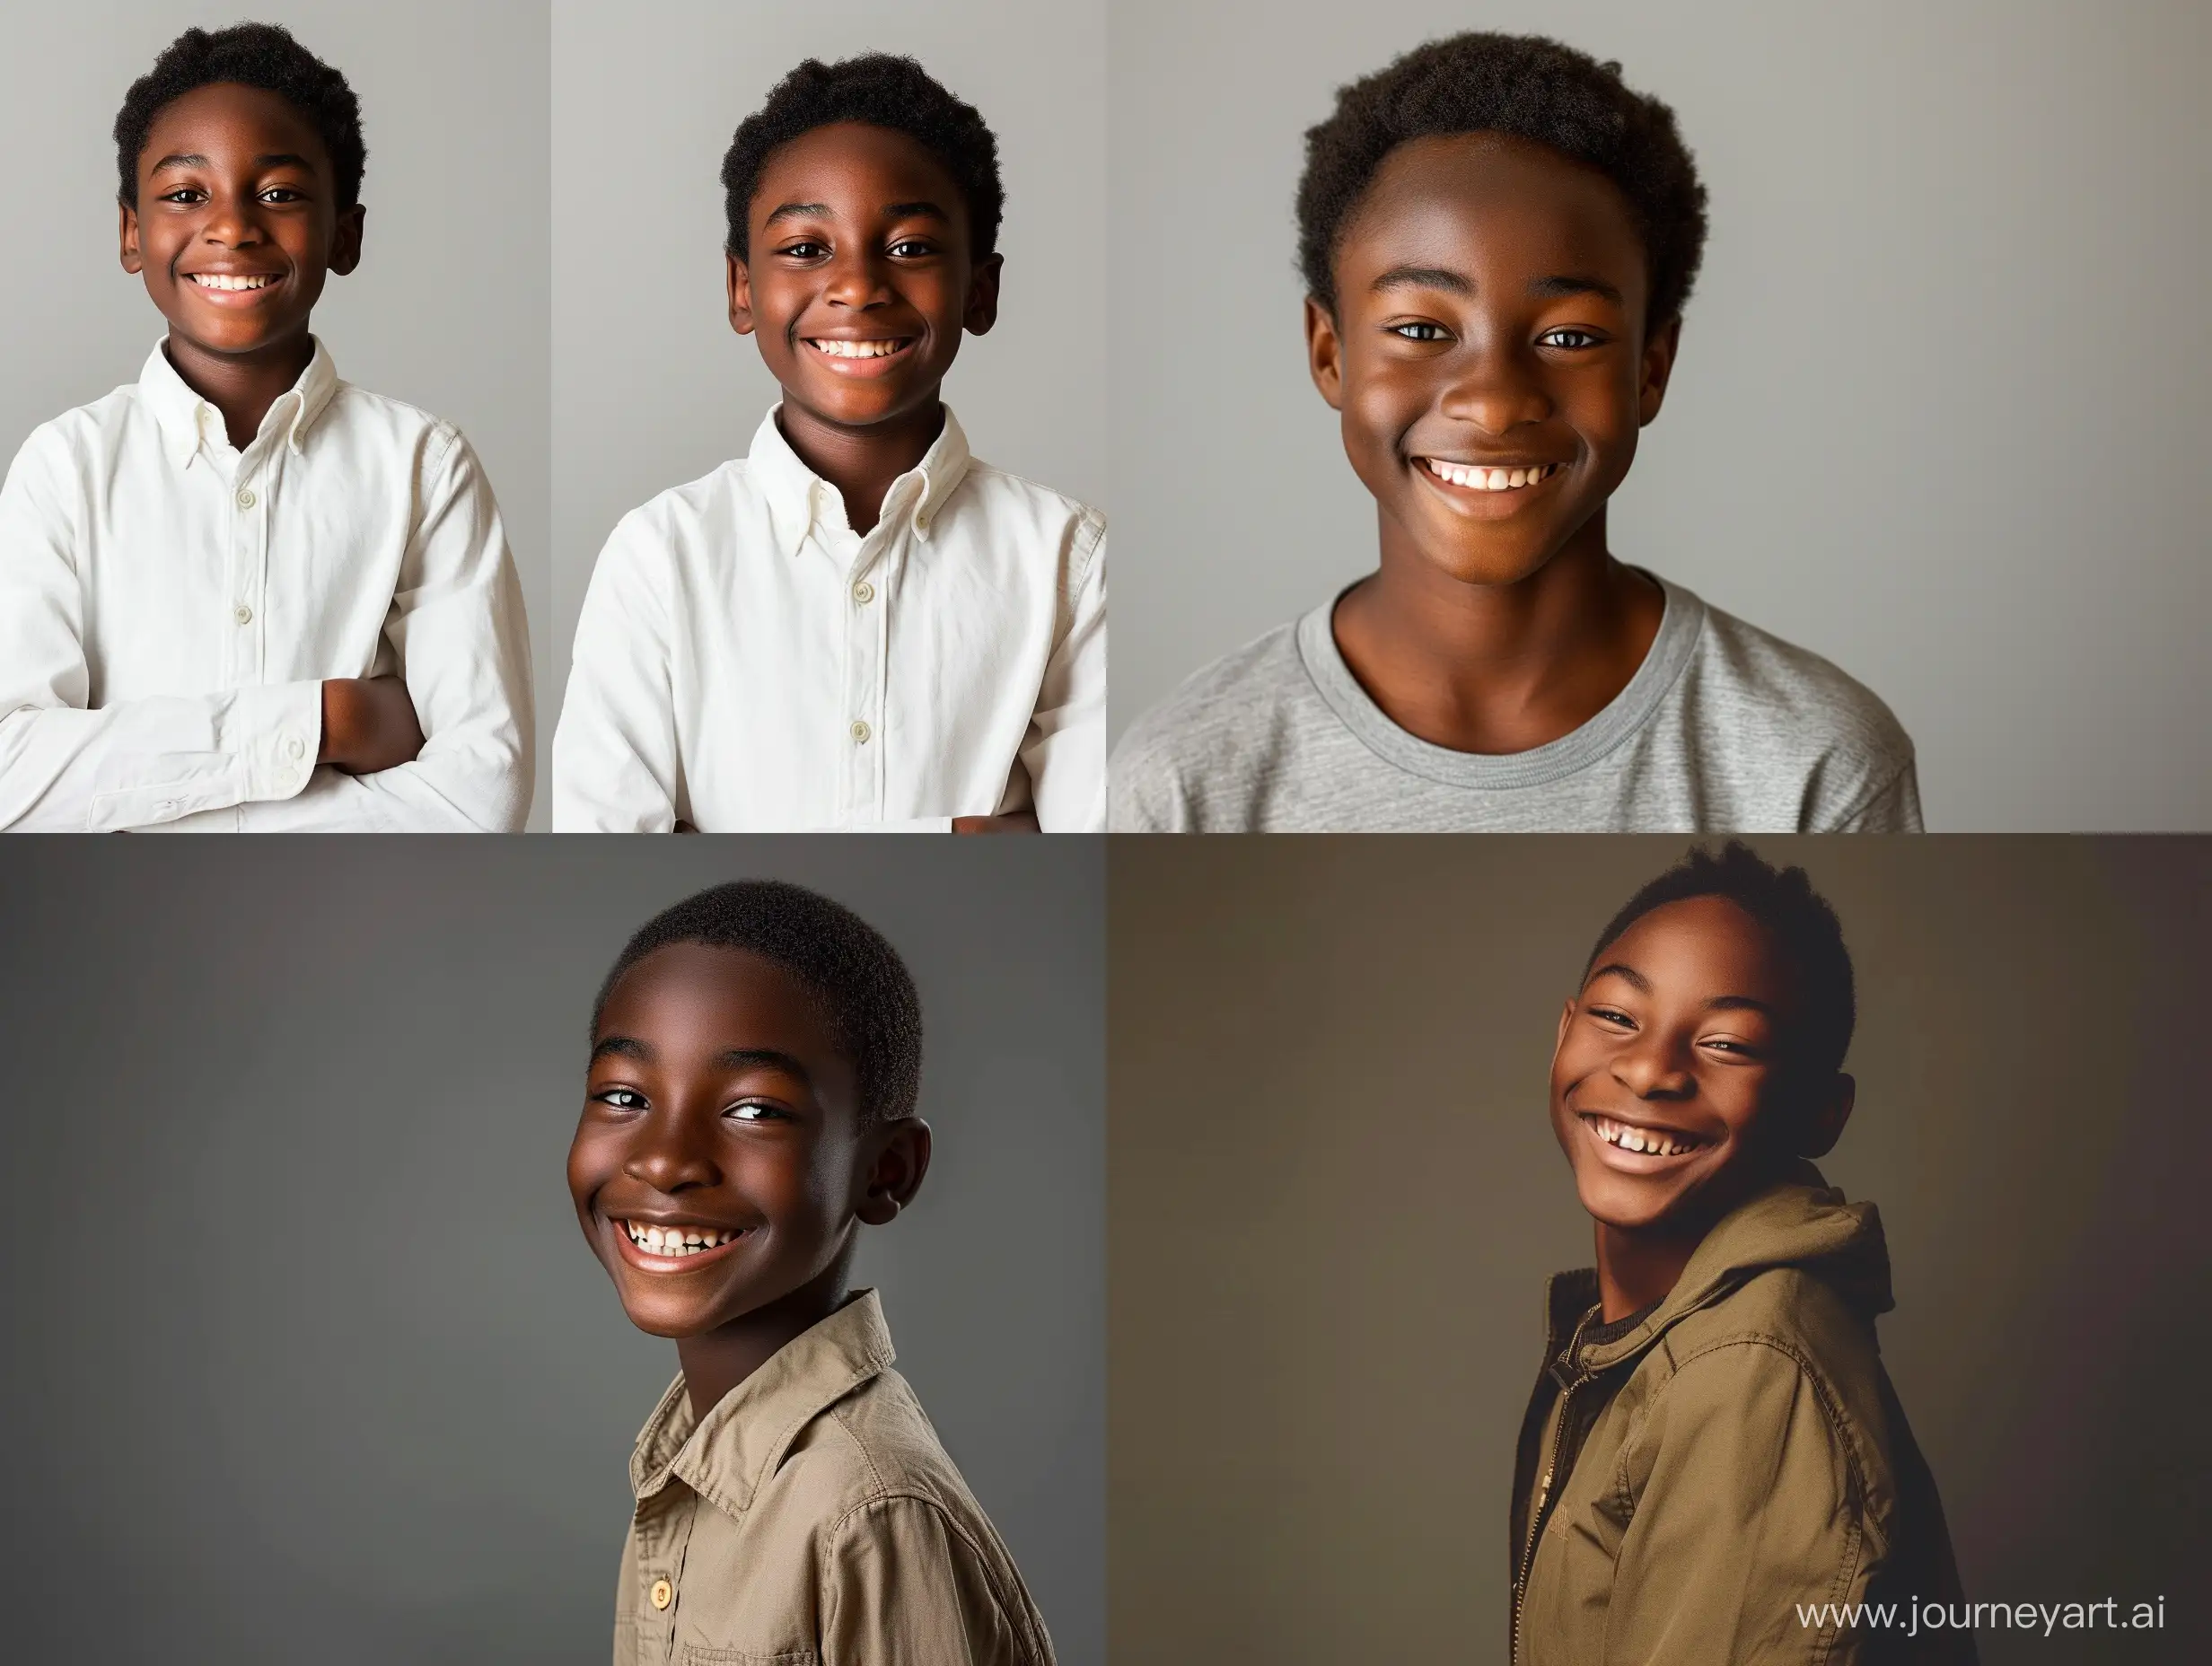 Generate a photorealistic, inspiring and relatable image of a smiling 14-year-old black dark skinned wealthy teenage boy from the waist up who exudes confidence and approachability. This will be the brand image for a mentorship organization that aims to empower teenagers. Use natural lighting, beautiful clothing styles, and authentic facial expressions to create a compelling image that resonates with the target audience. The image should look like it was taken by a canon 6d mk II 105mm lens